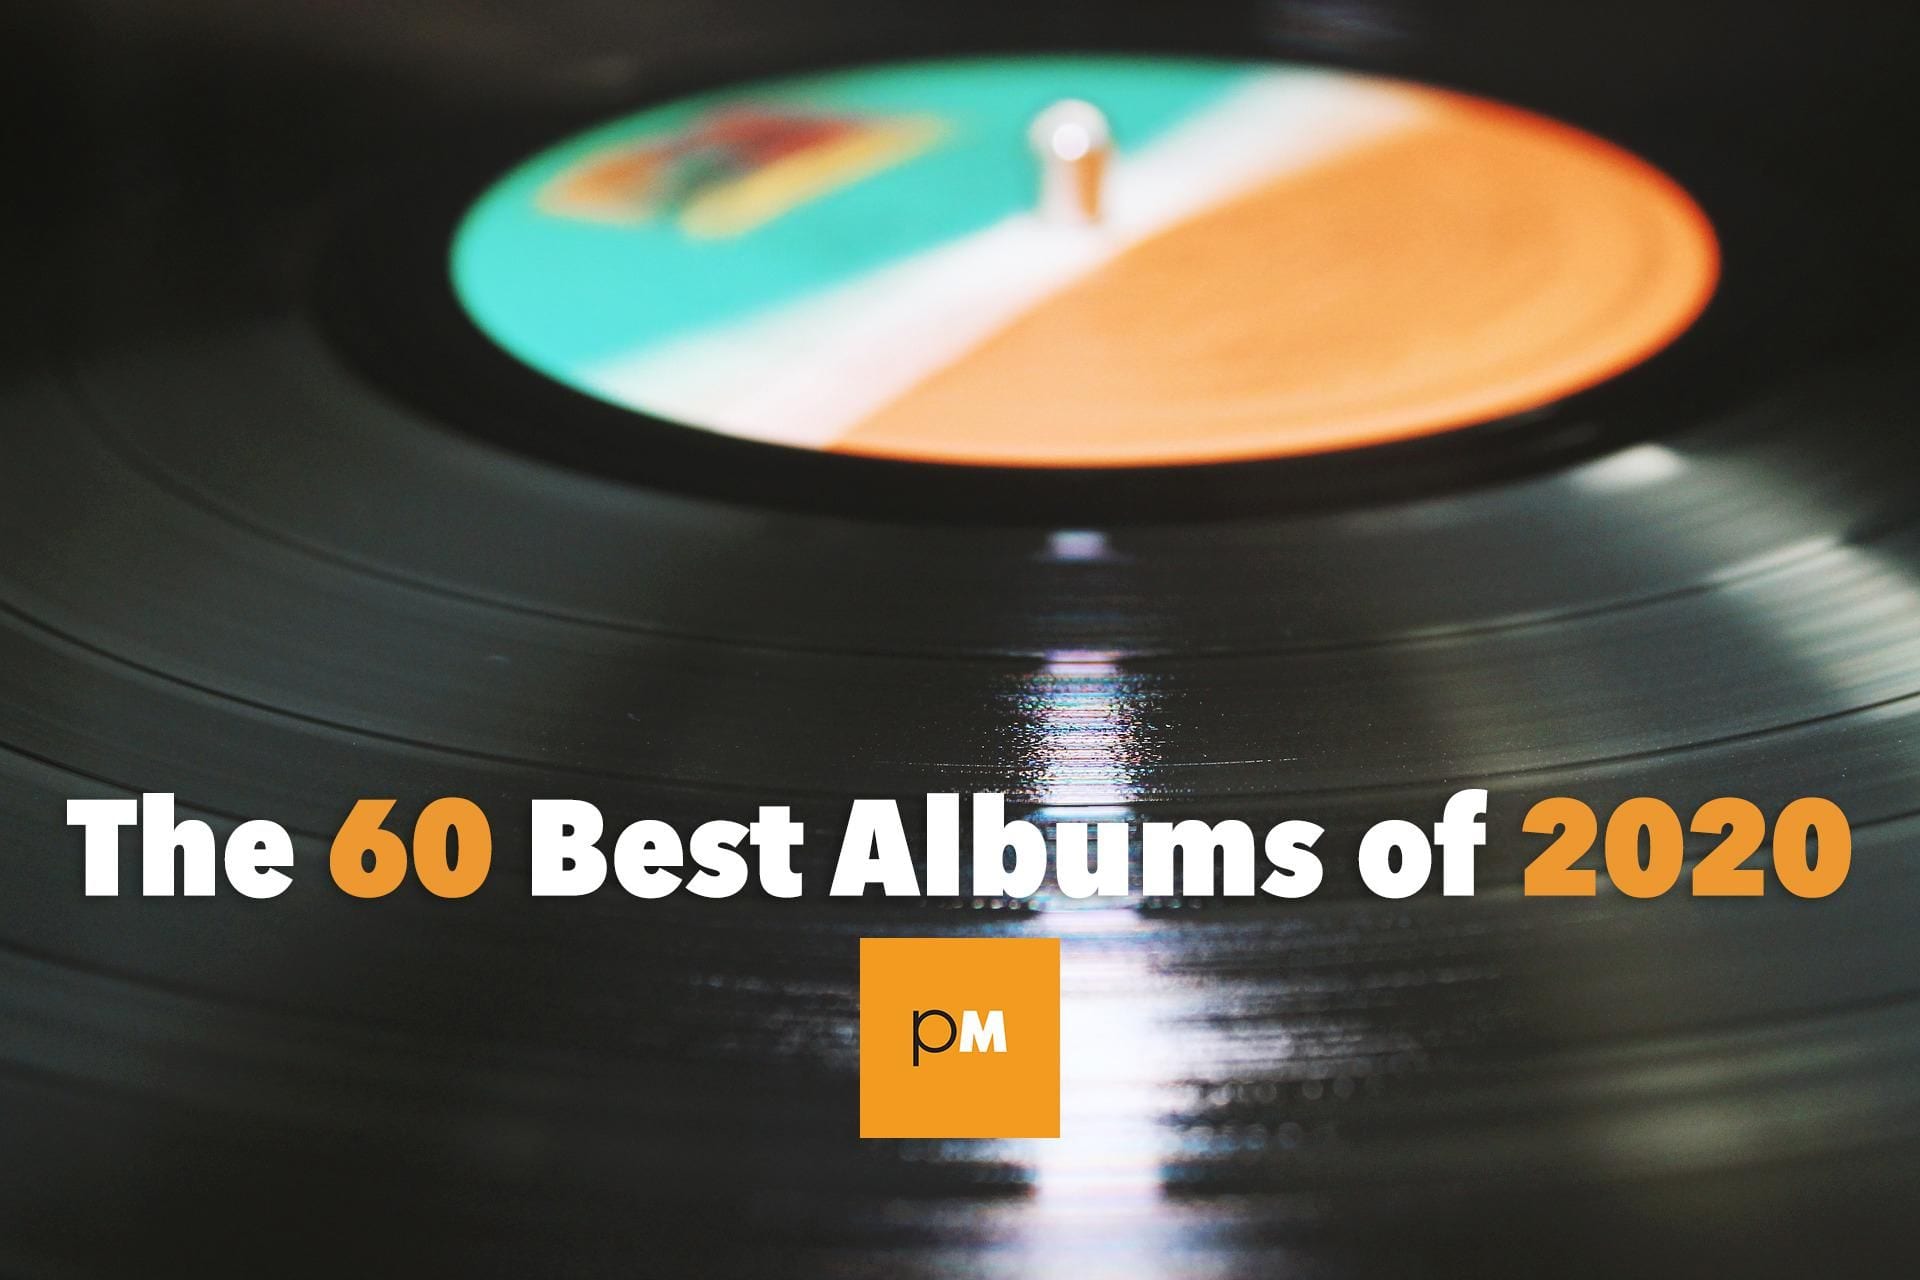 The 60 Best Albums of 2020